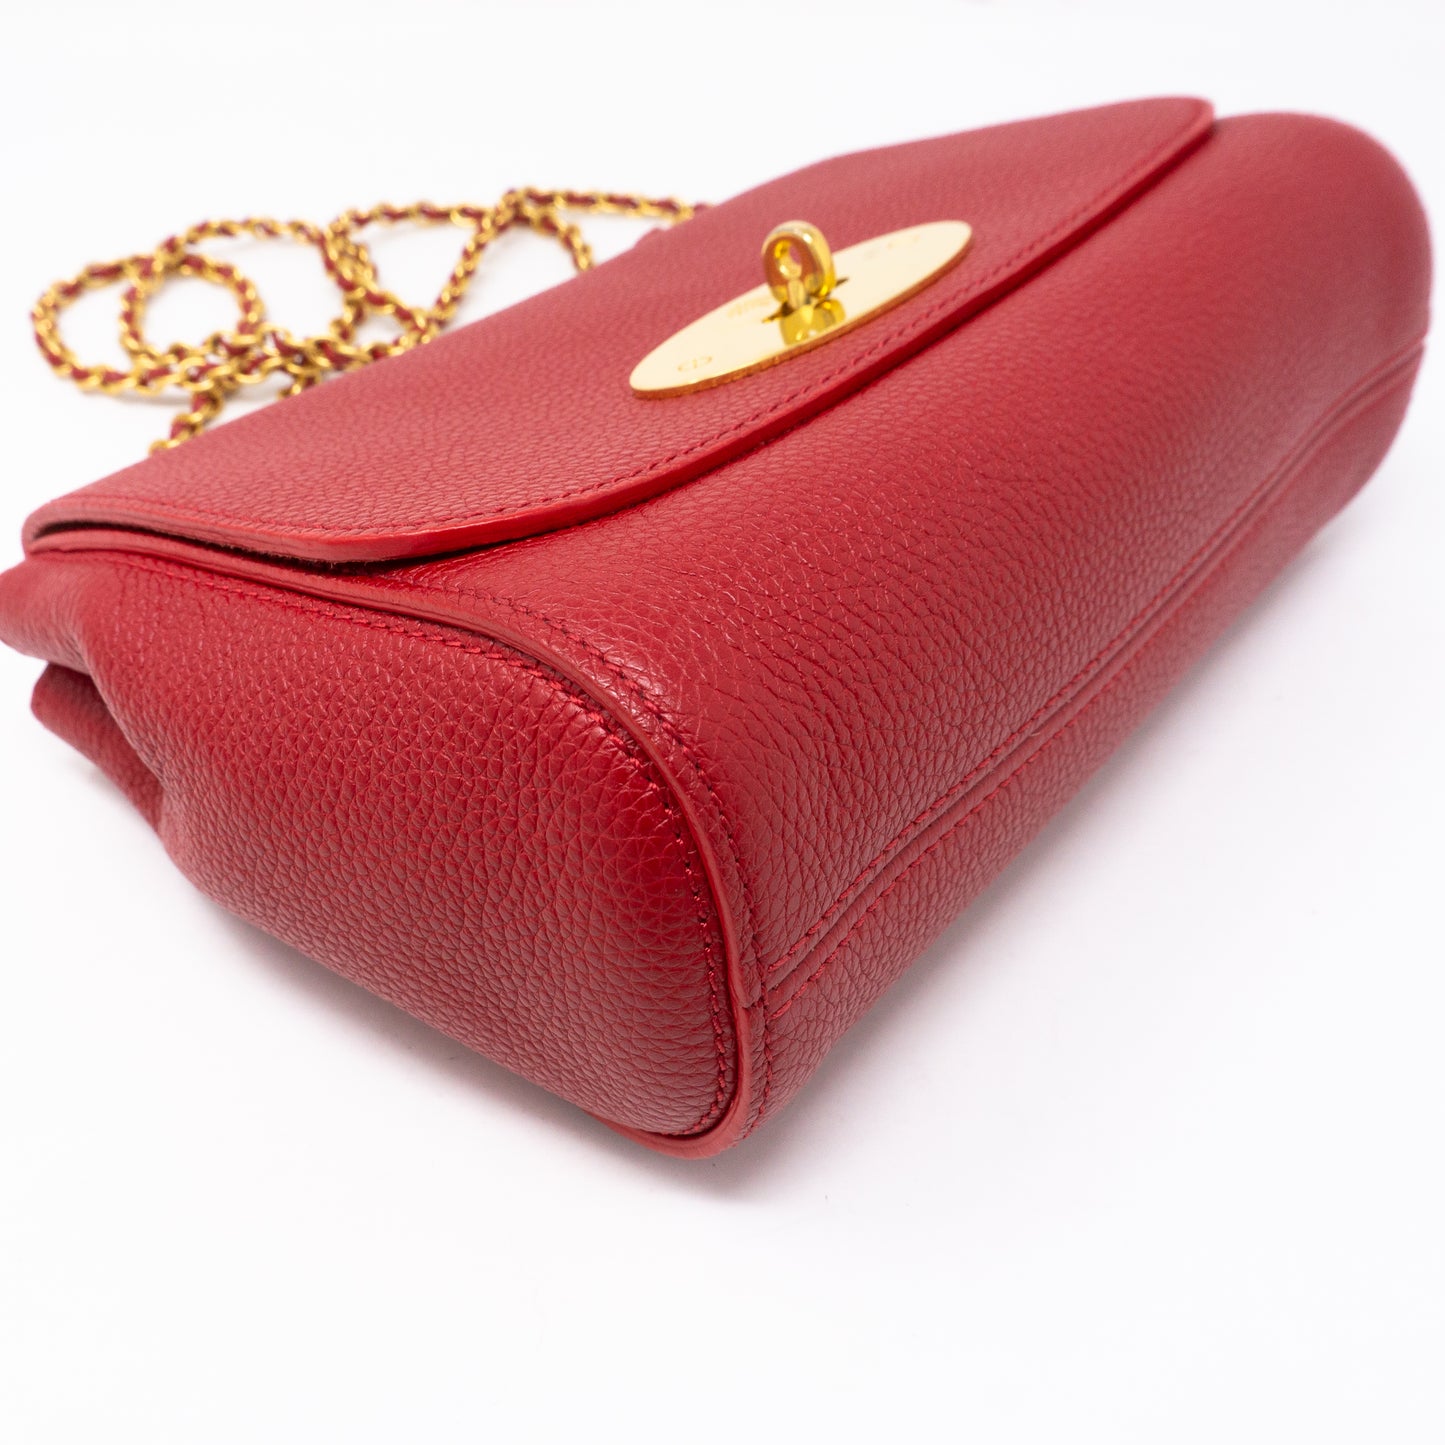 Lily Small Red Leather